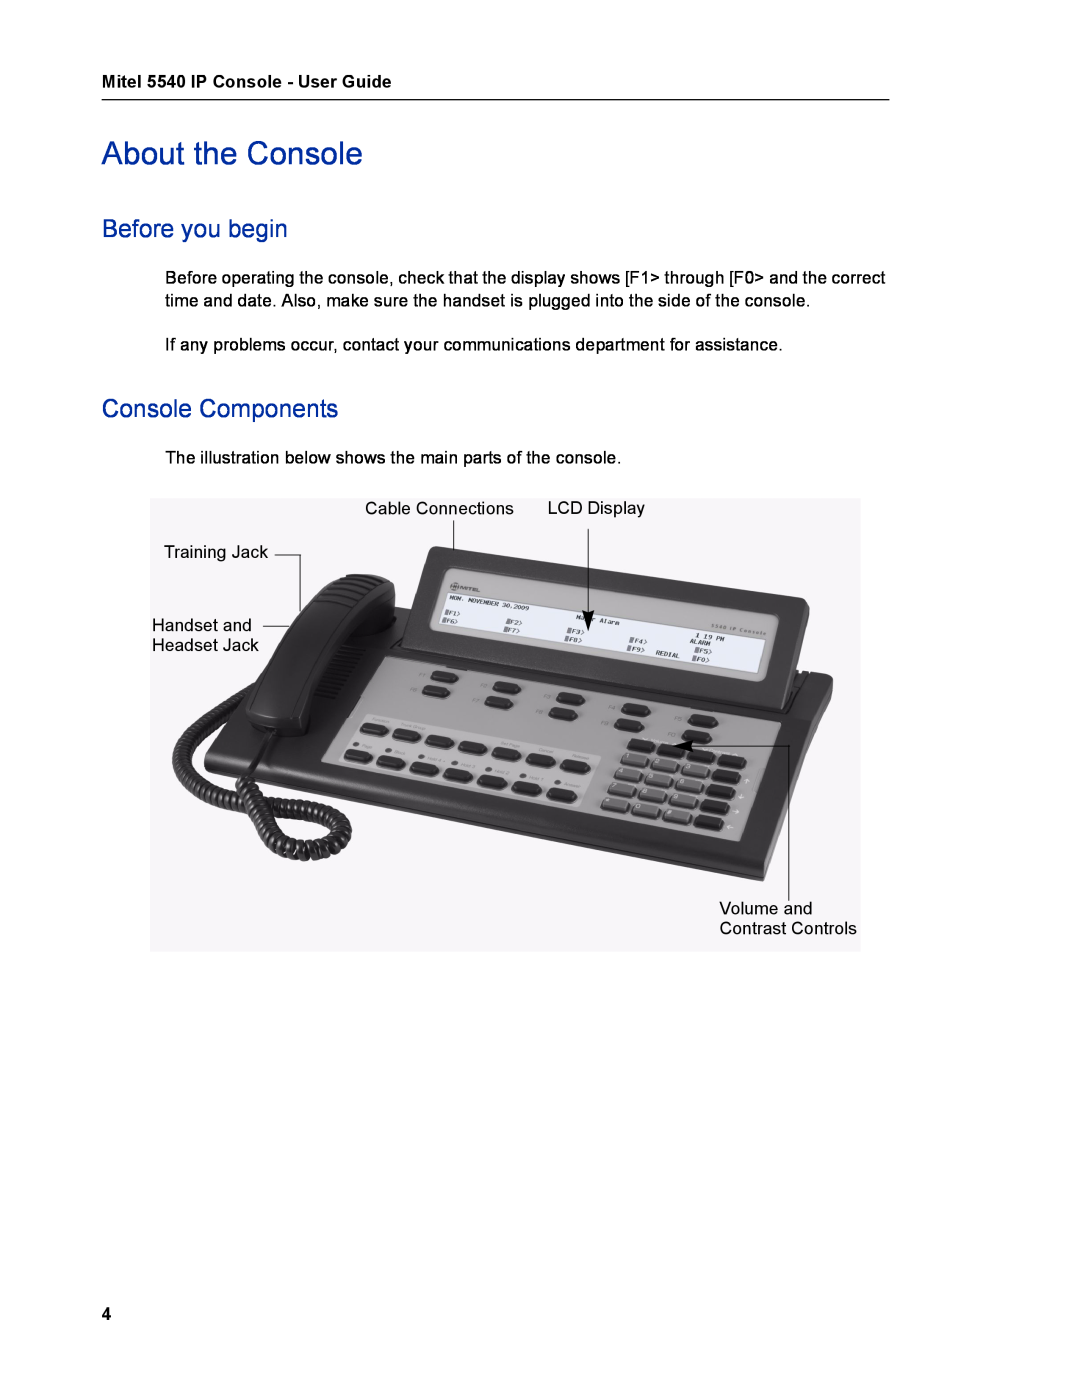 Mitel manual About the Console, Before you begin, Console Components, Mitel 5540 IP Console - User Guide 